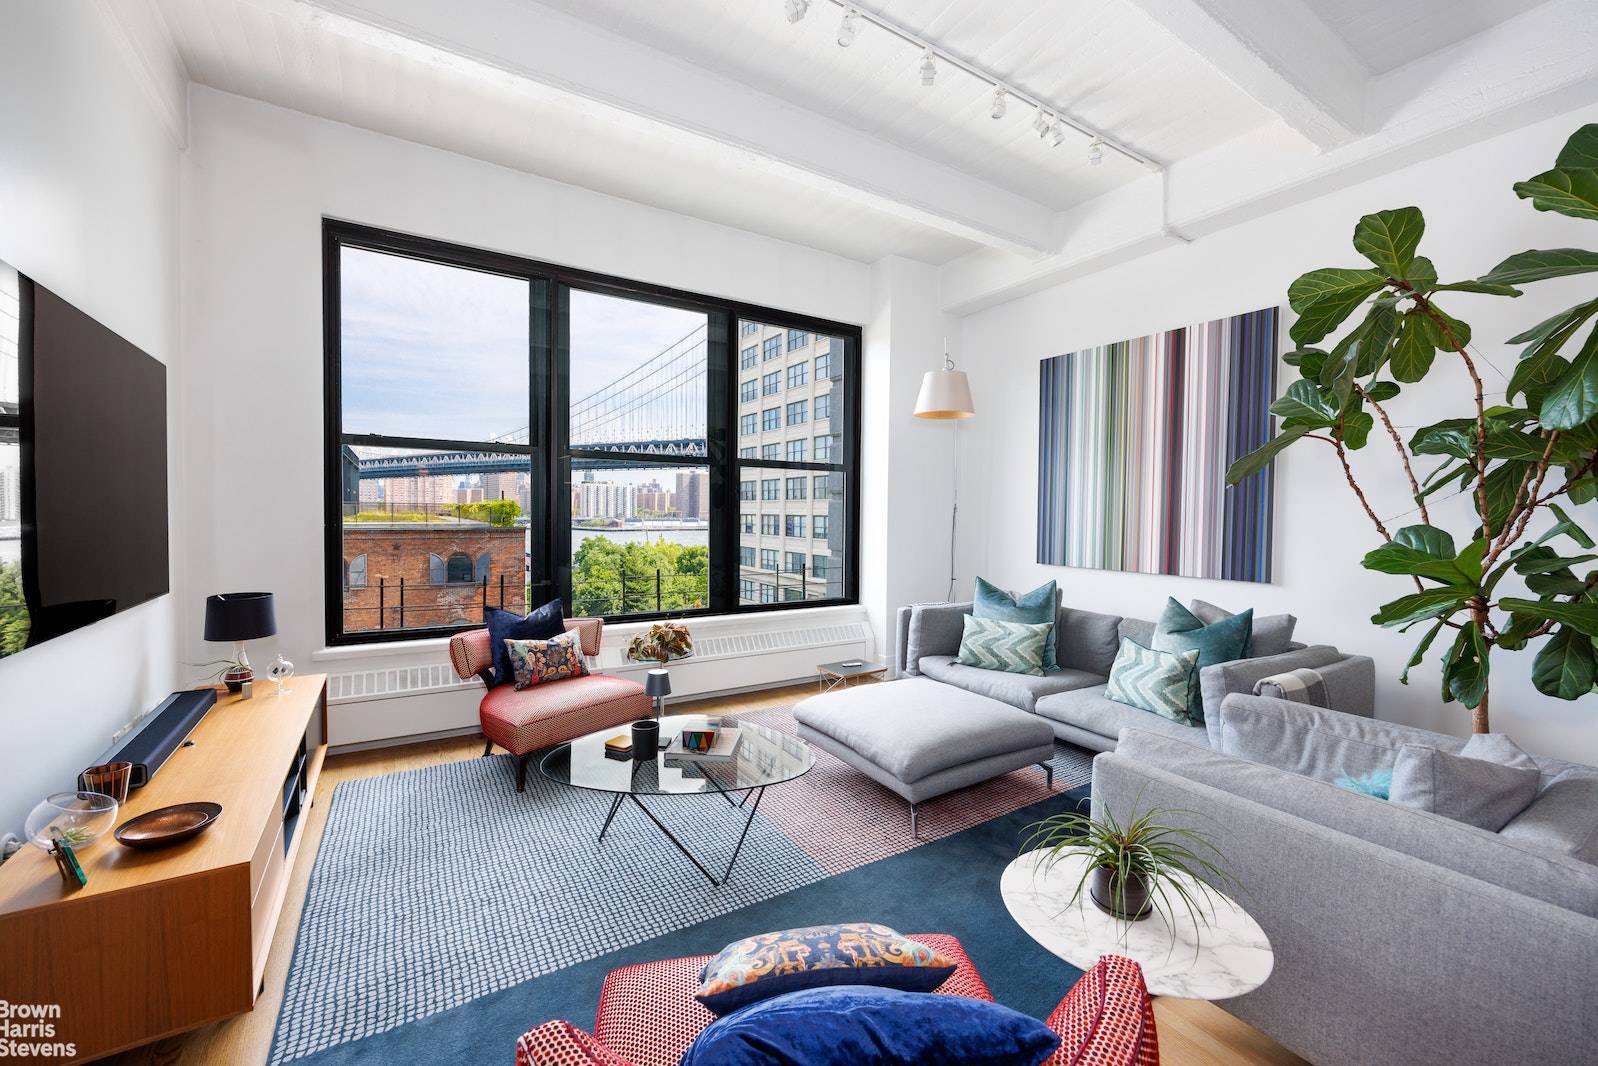 A rare opportunity to rent this stunning loft in Dumbo's highly coveted Sweeney Building.